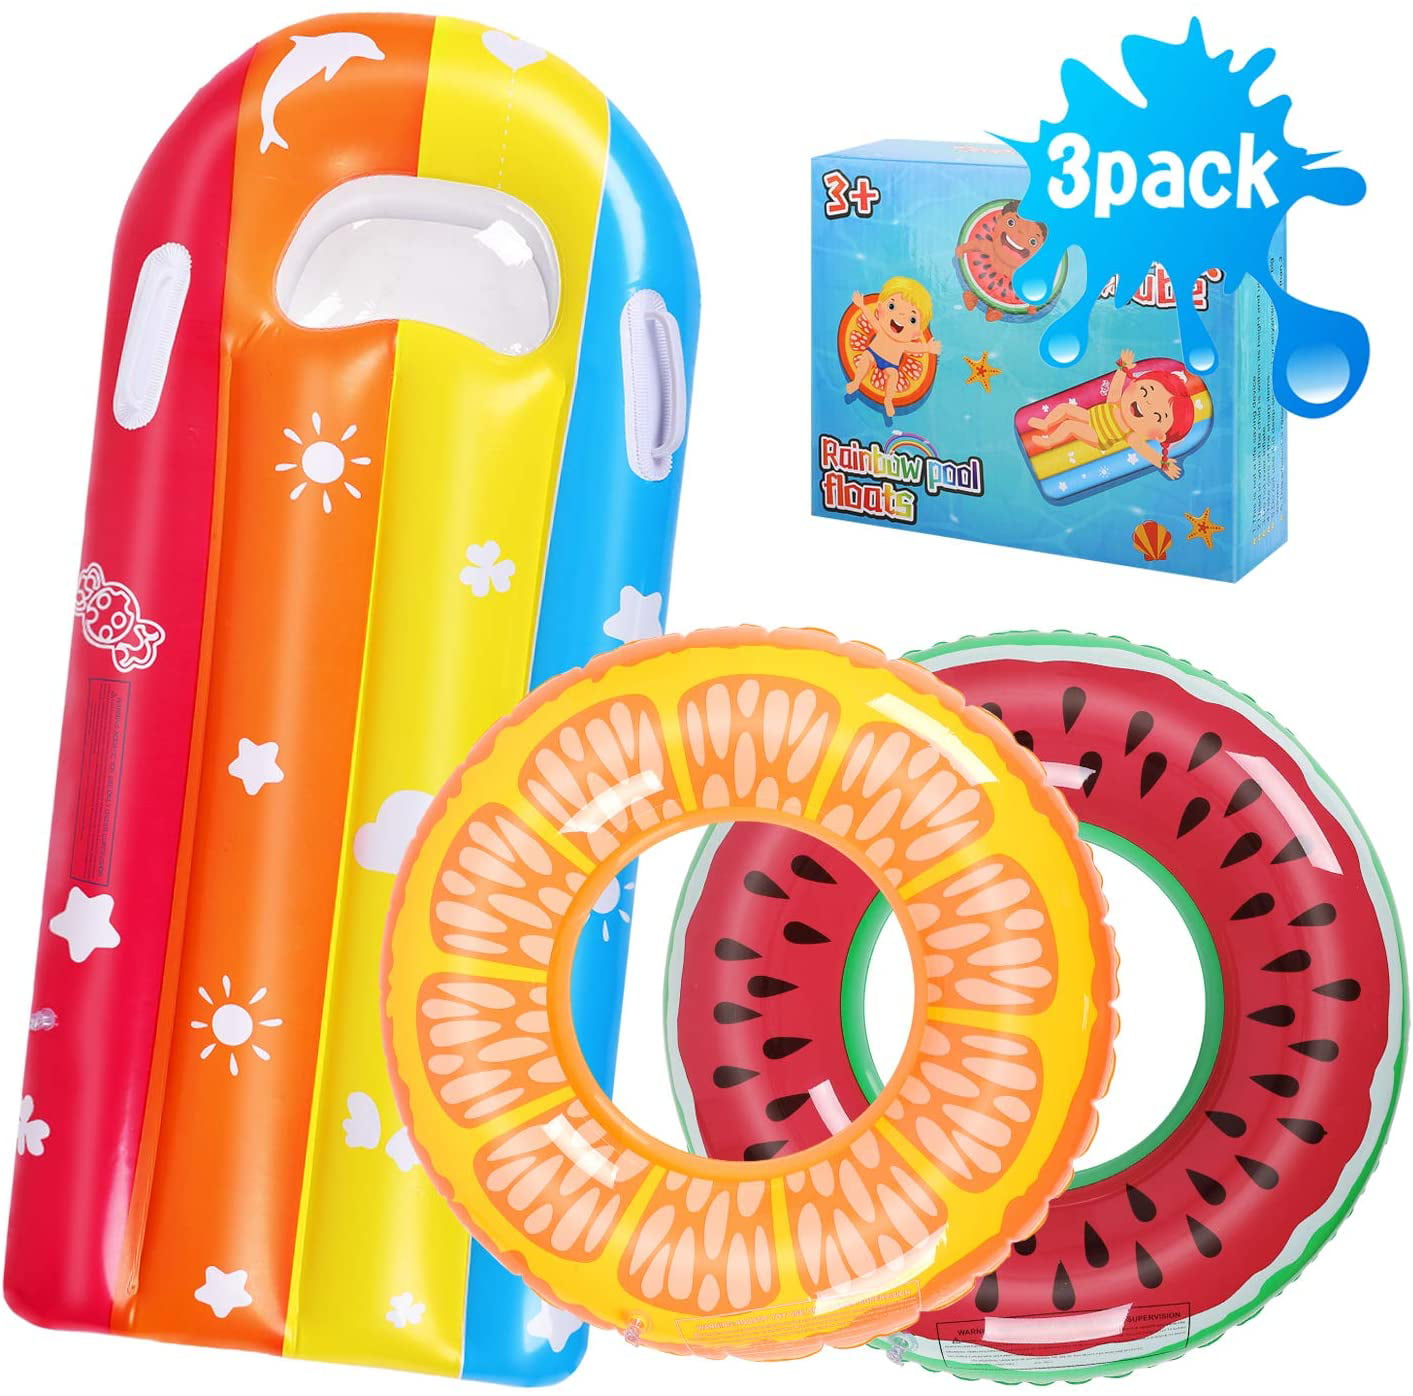 Swimming Beginner，Beach Party Supplies. Swimming Rings for Kids and Adults balnore Inflatable Pool Float Toys for Kids,3 Pack rafts for Swim Pools Floaties Beach Water Toys Gifts for Kids 